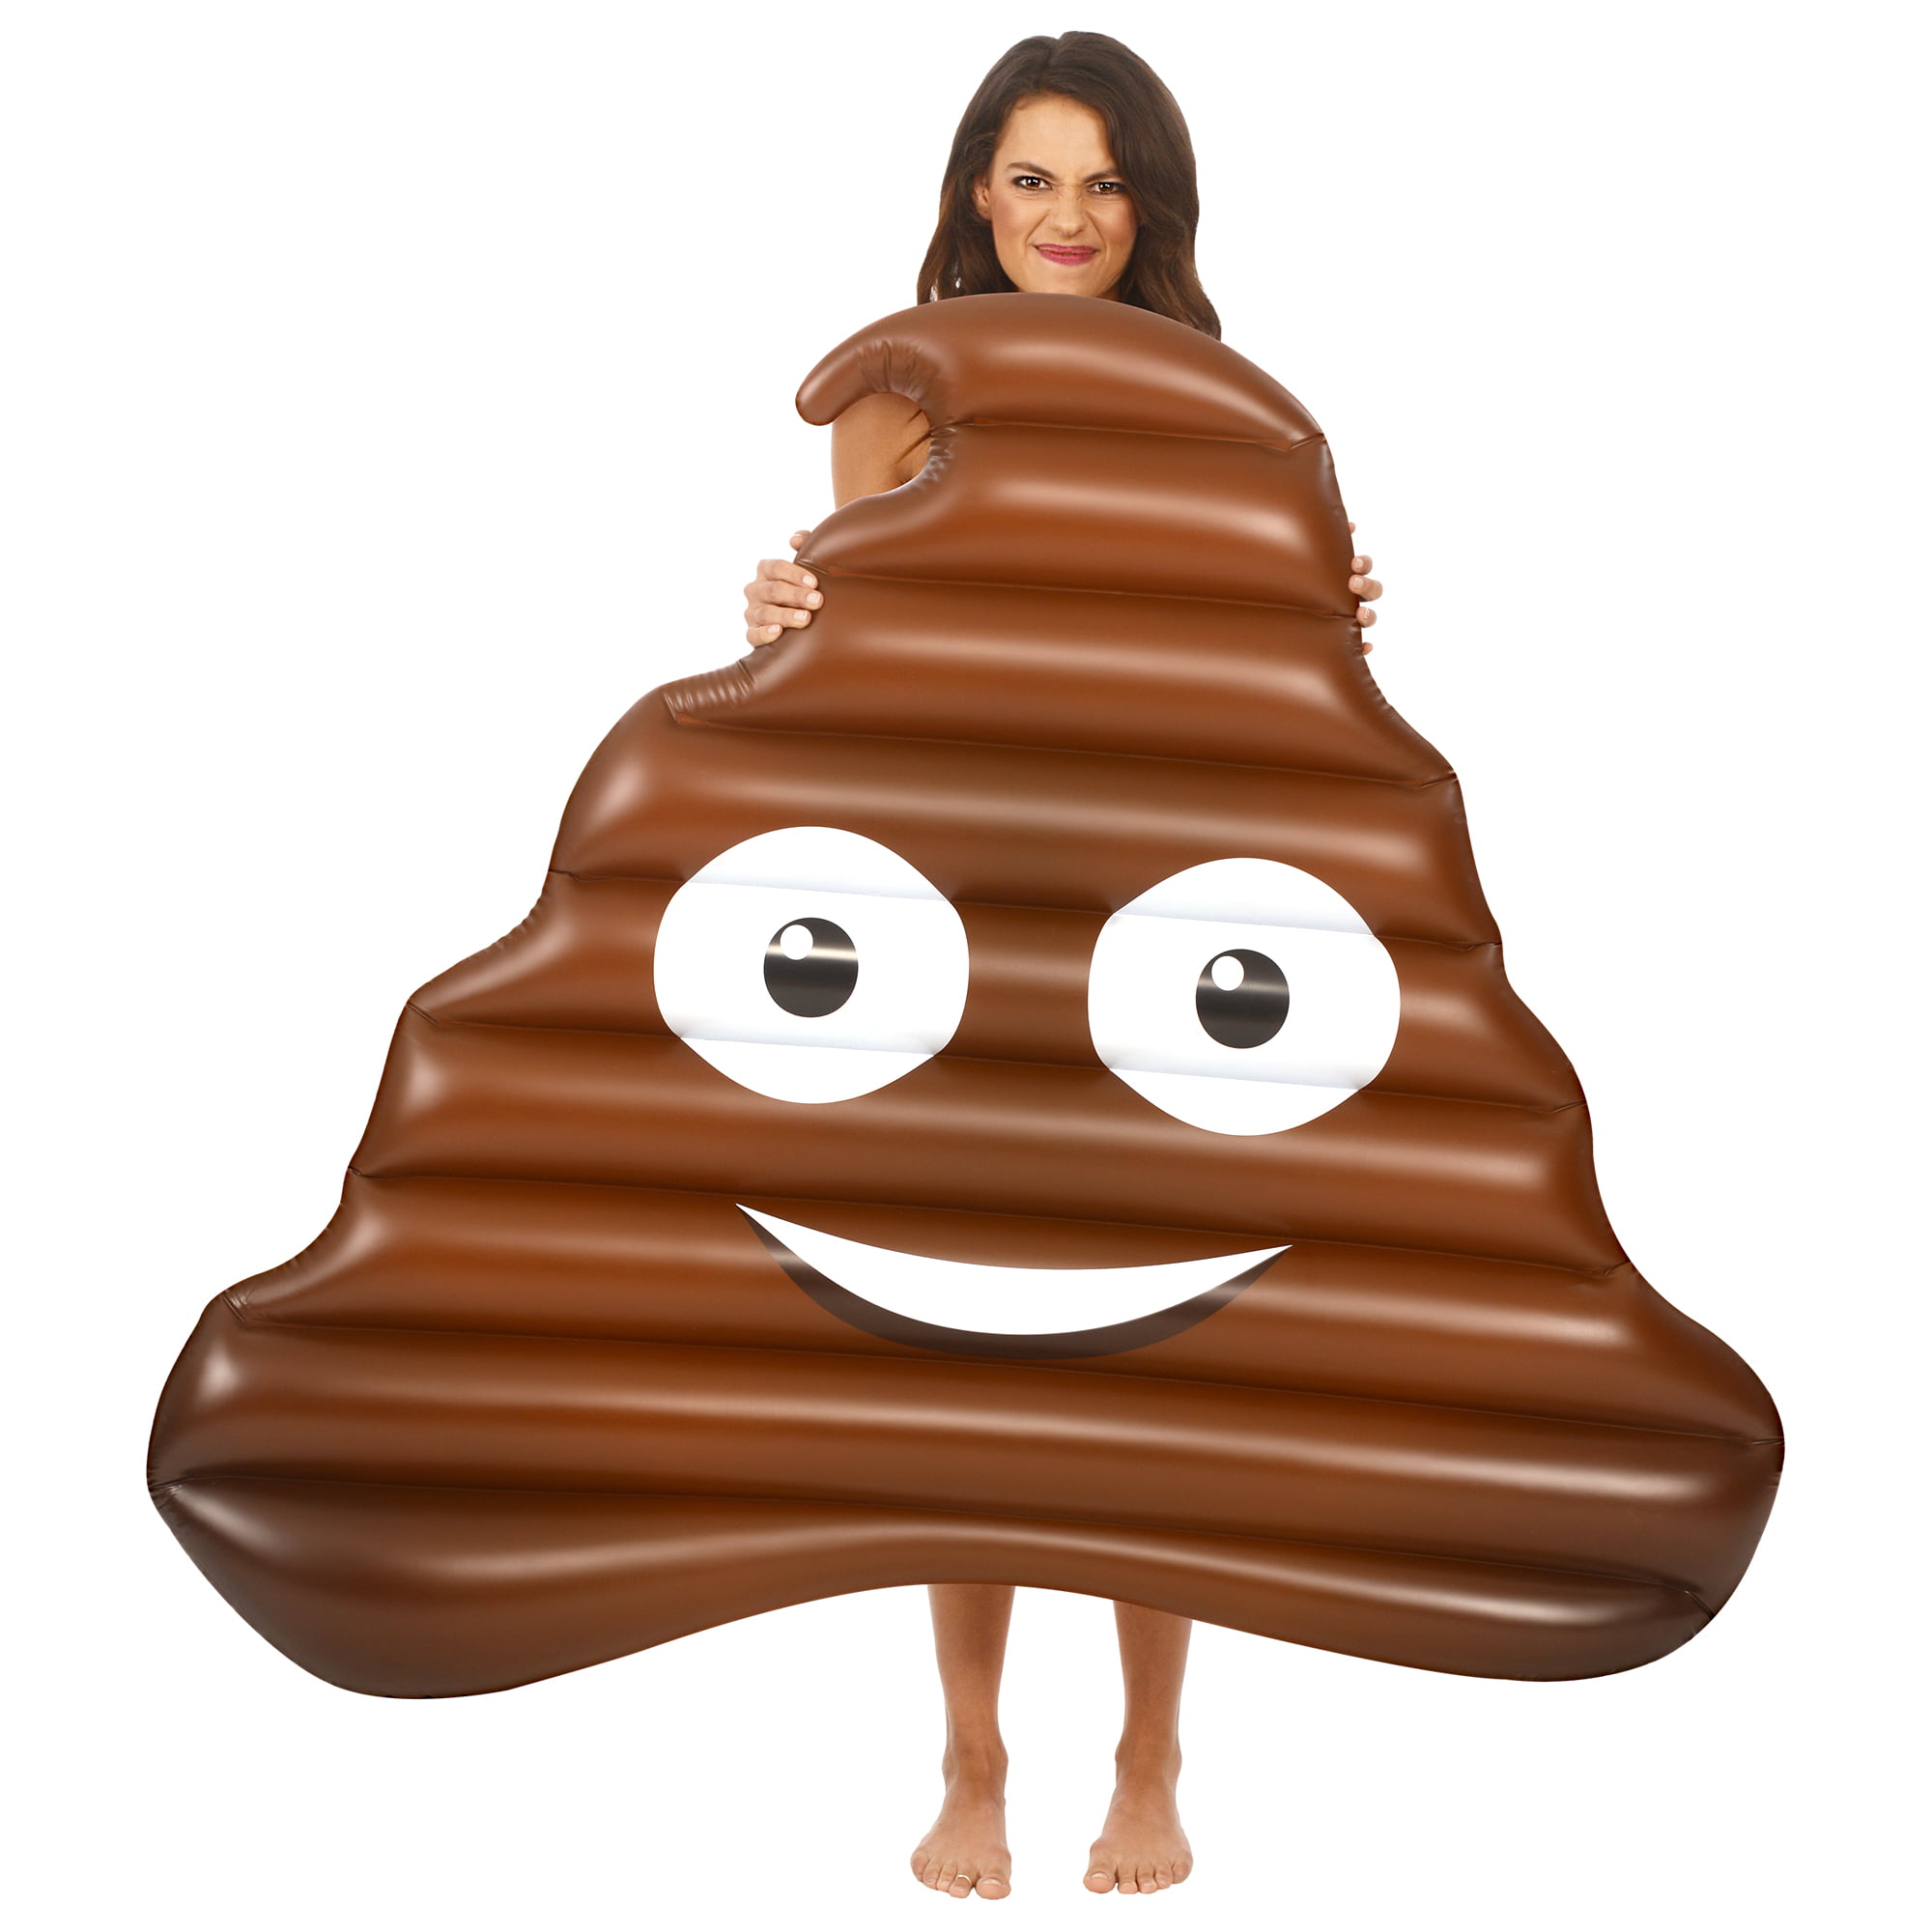 48" X 42.5" Family Fun Details about   Pool Float Inflatable Brown Poop Emoji Play Day Ages 9 